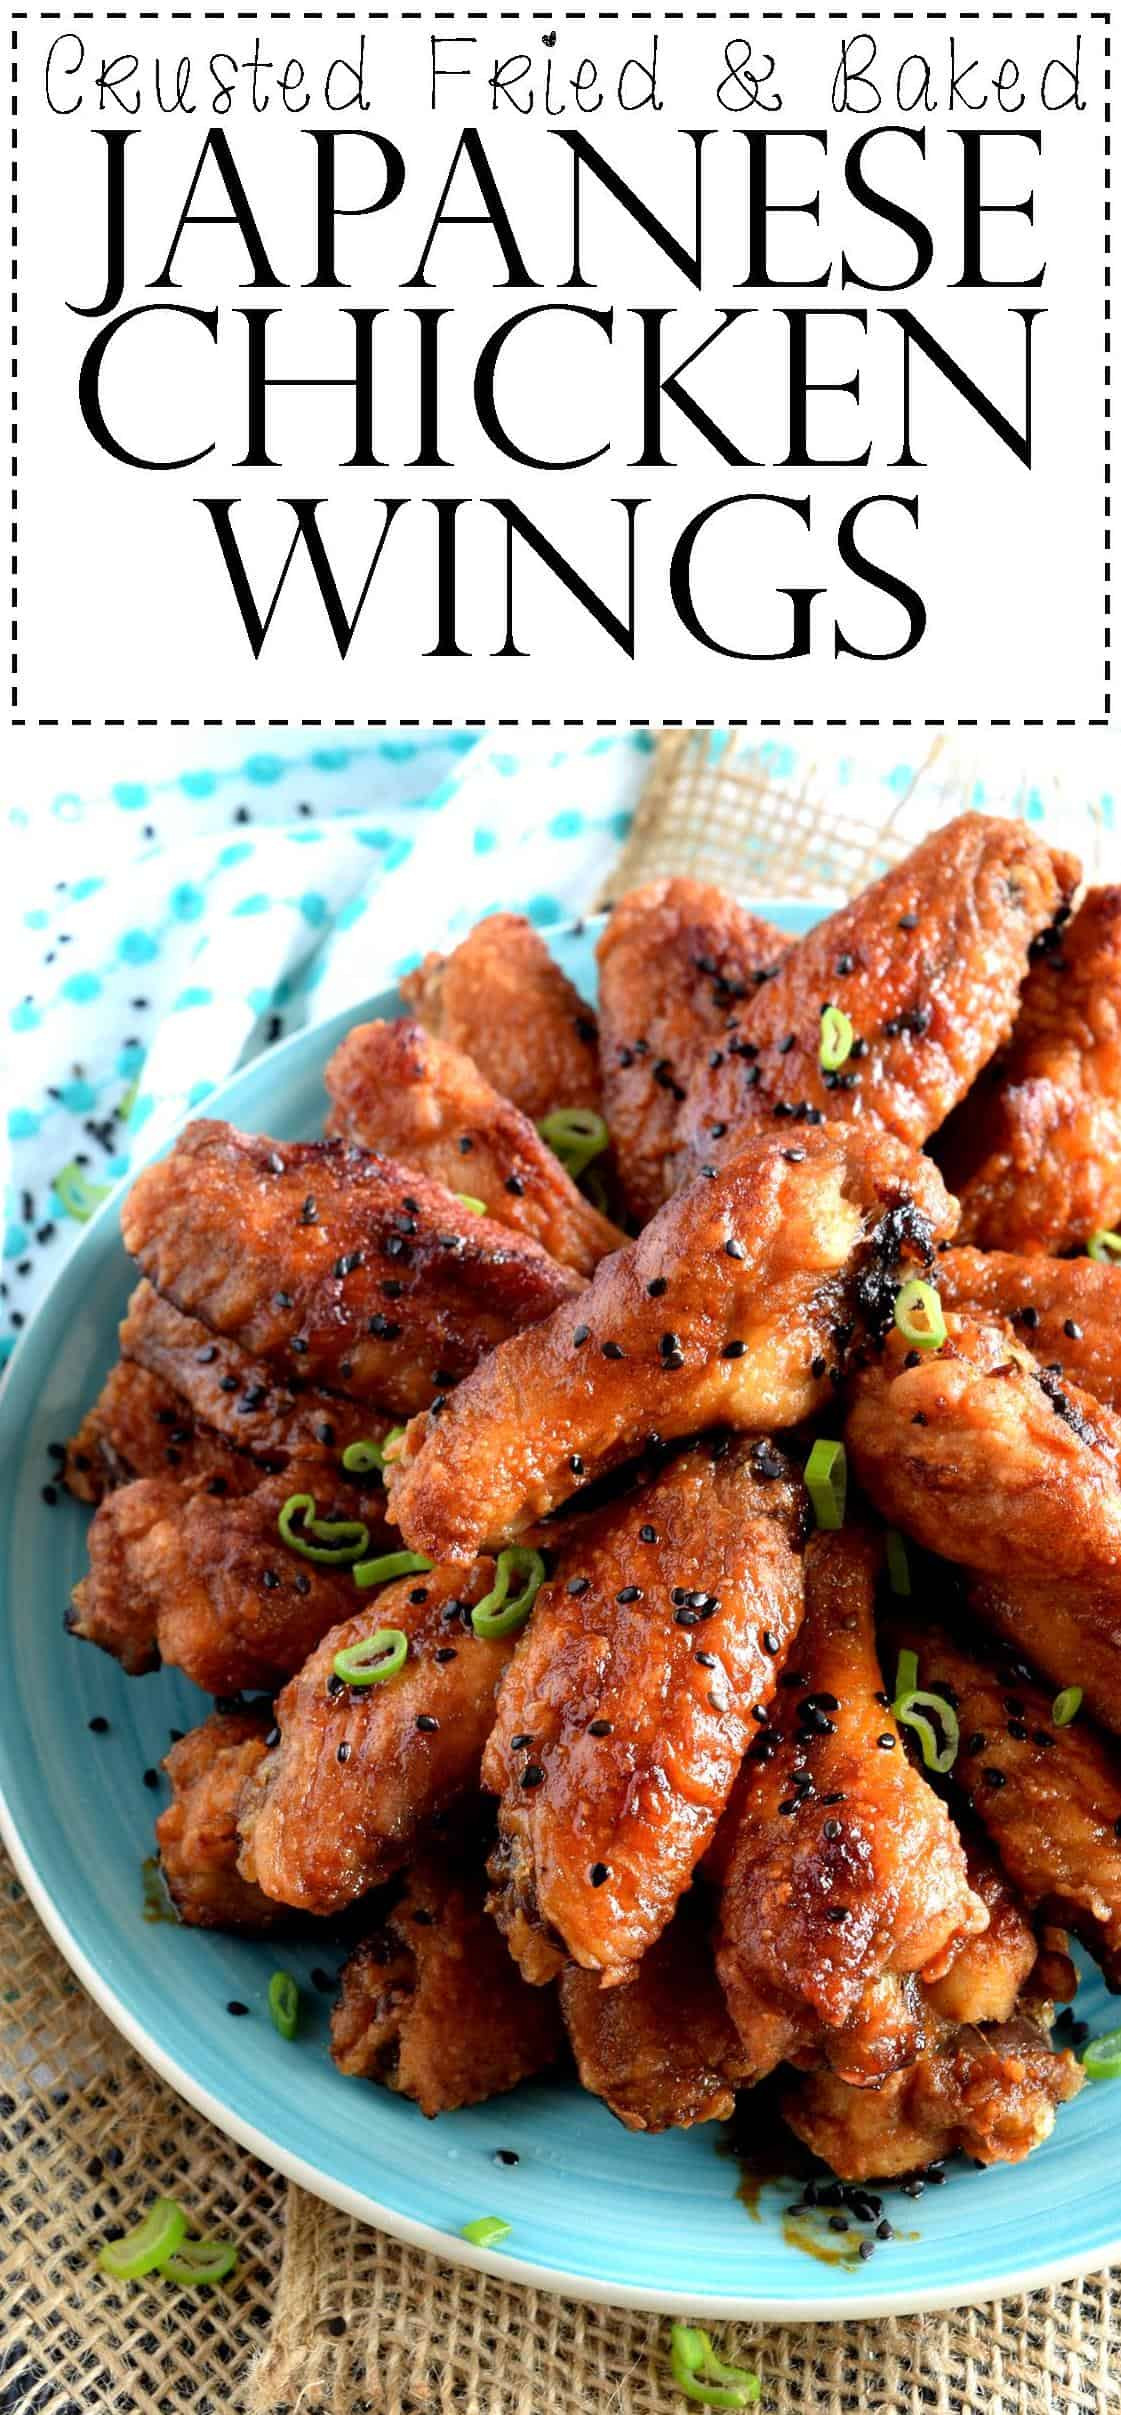 Fried Chicken Wing Recipes
 Crusted Fried and Baked Japanese Chicken Wings Lord